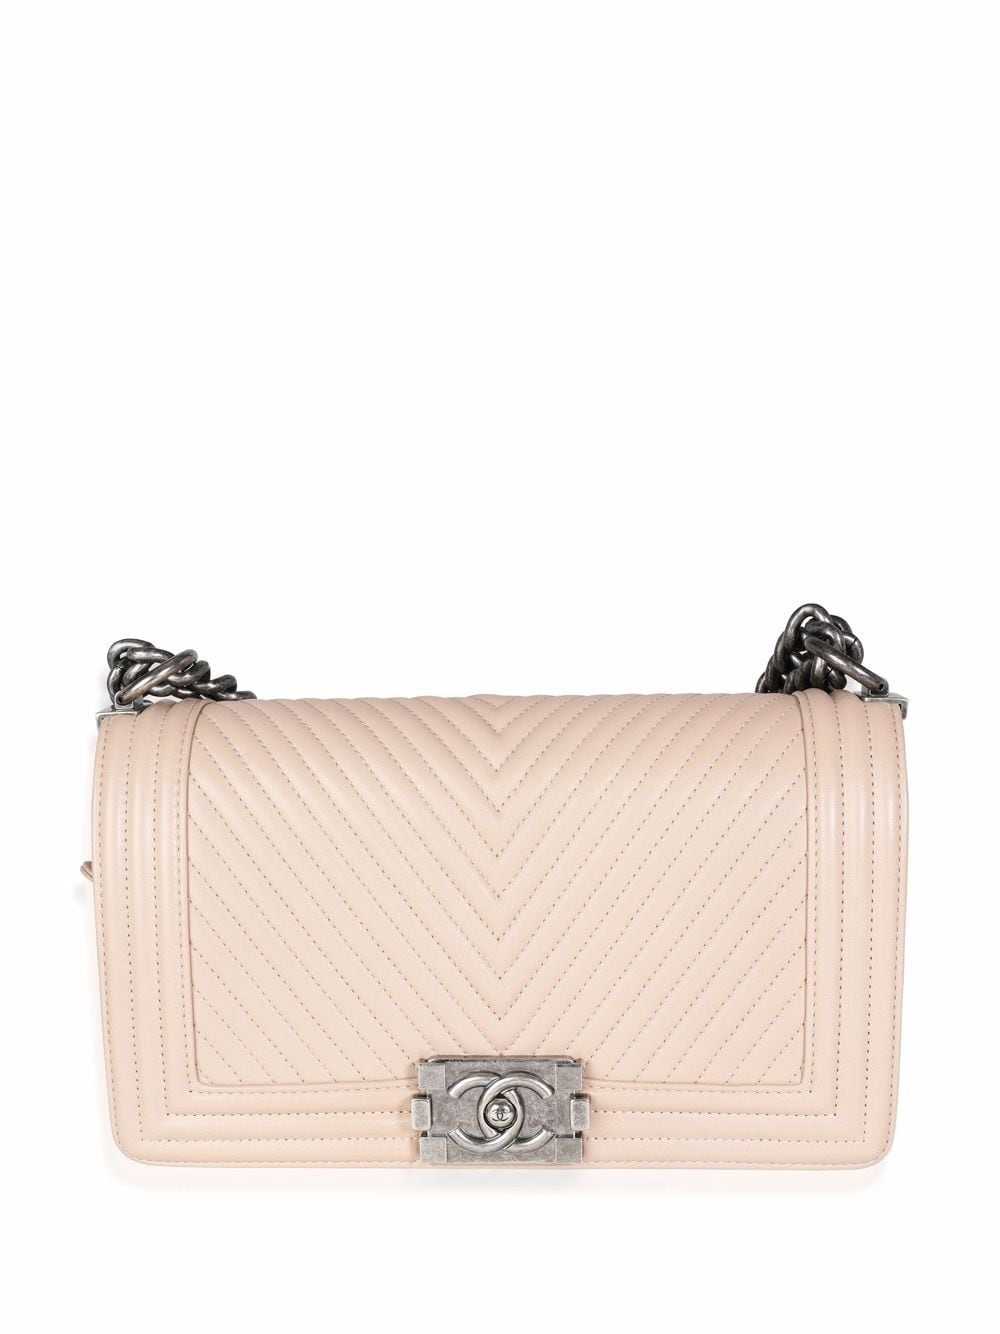 Chanel pre-owned small boy - Gem